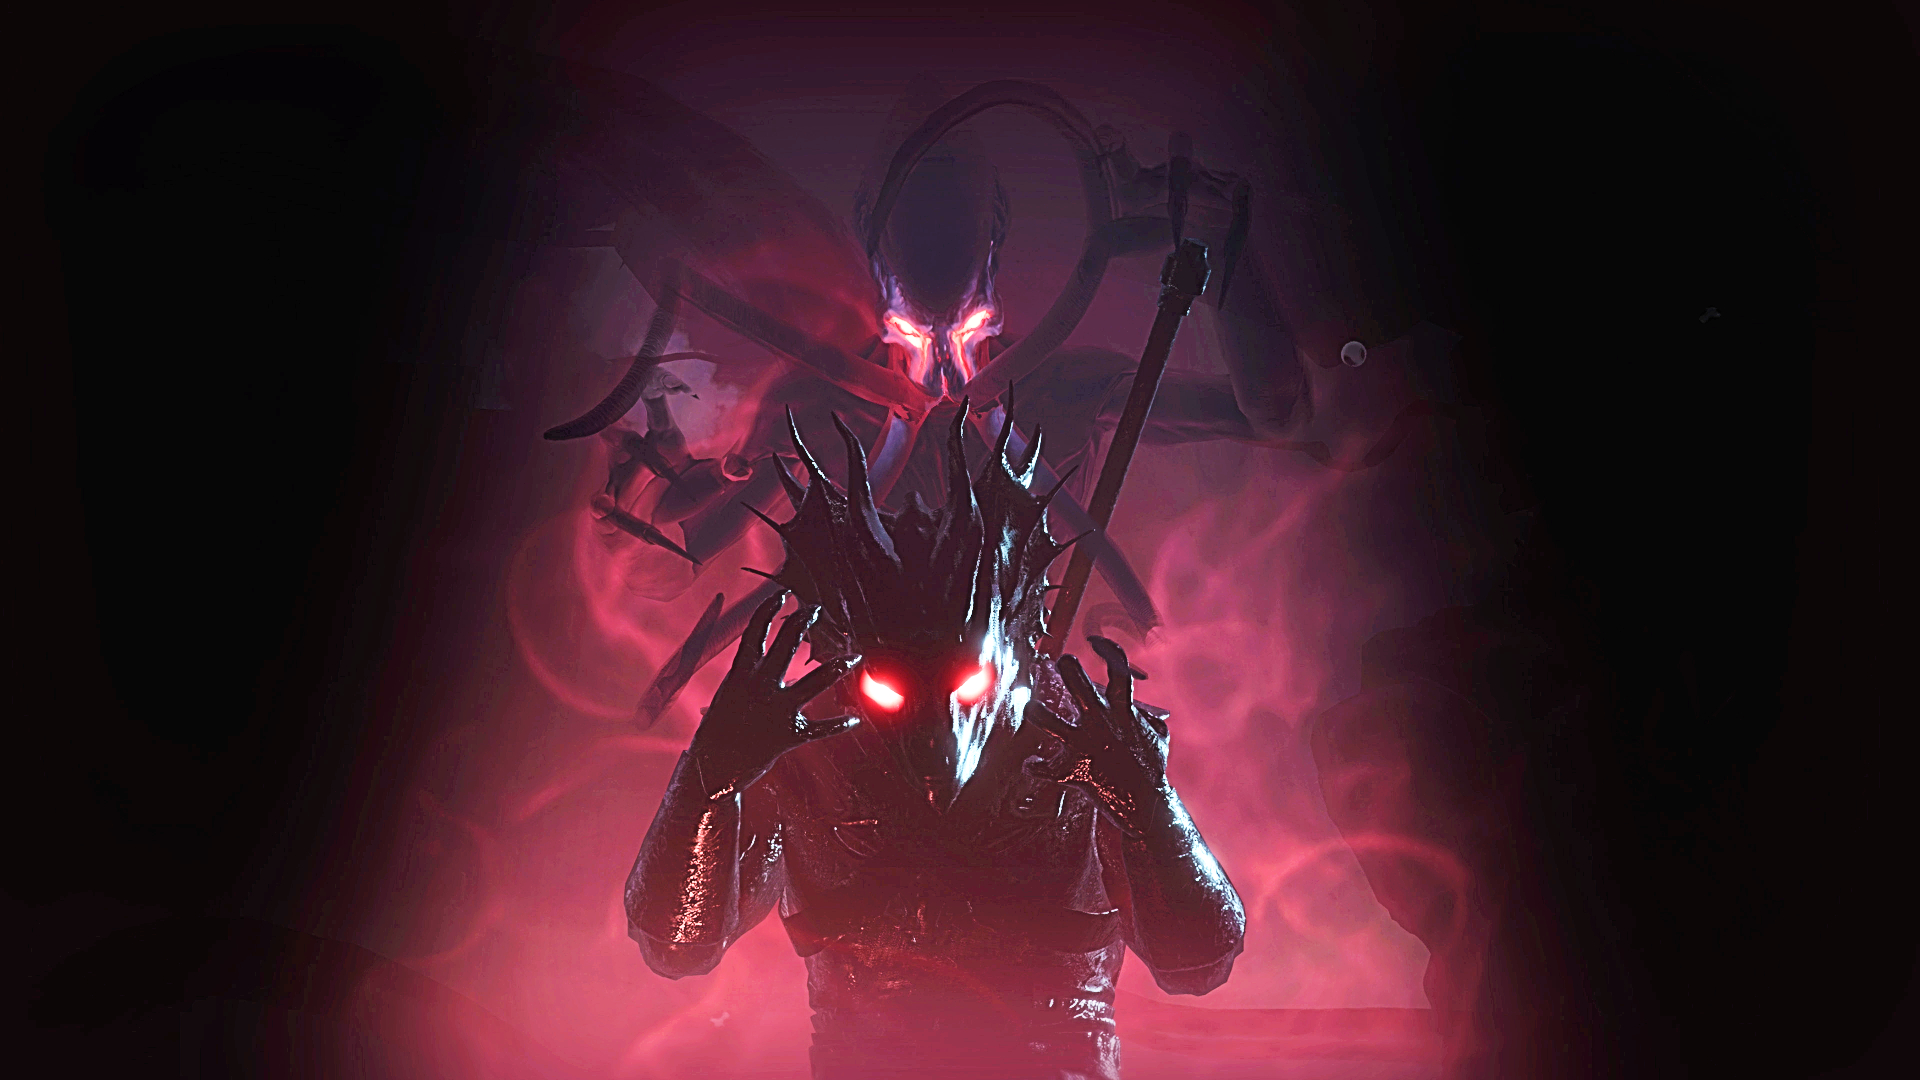 Baldur’s Gate 3 lets you “wield the power of a mind flayer”